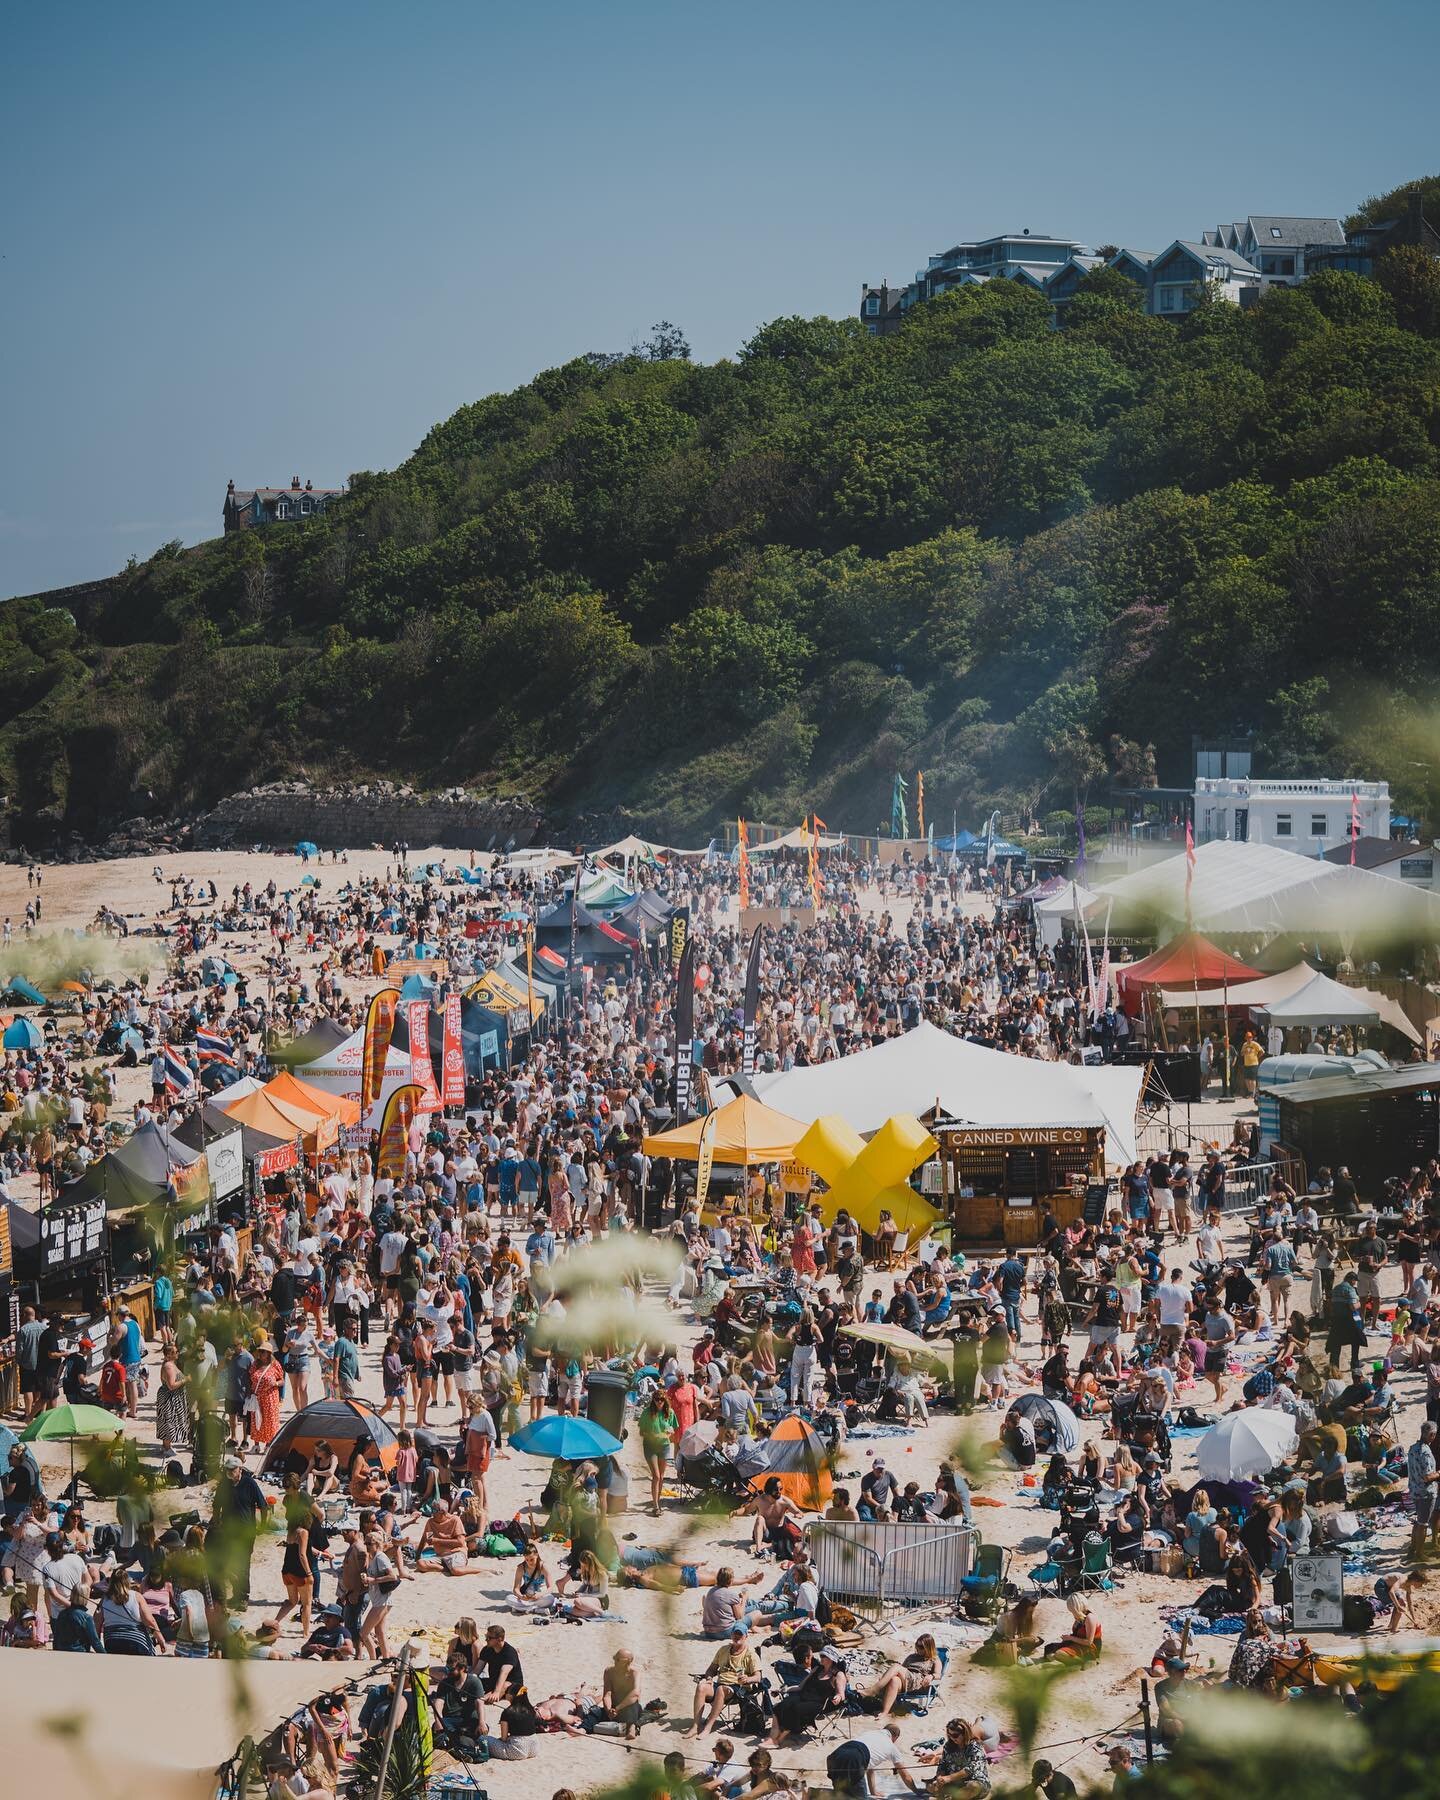 Cracking second day @stivesfoodfest seeing some old faces cook up a storm on the @countryfirekitchen - mega busy day but full of smiles and sunshine!

#stives #stivesfoodfestival #food #festival #cornwall #cornwalluk #chefs #chefdemo #asado #beach #b